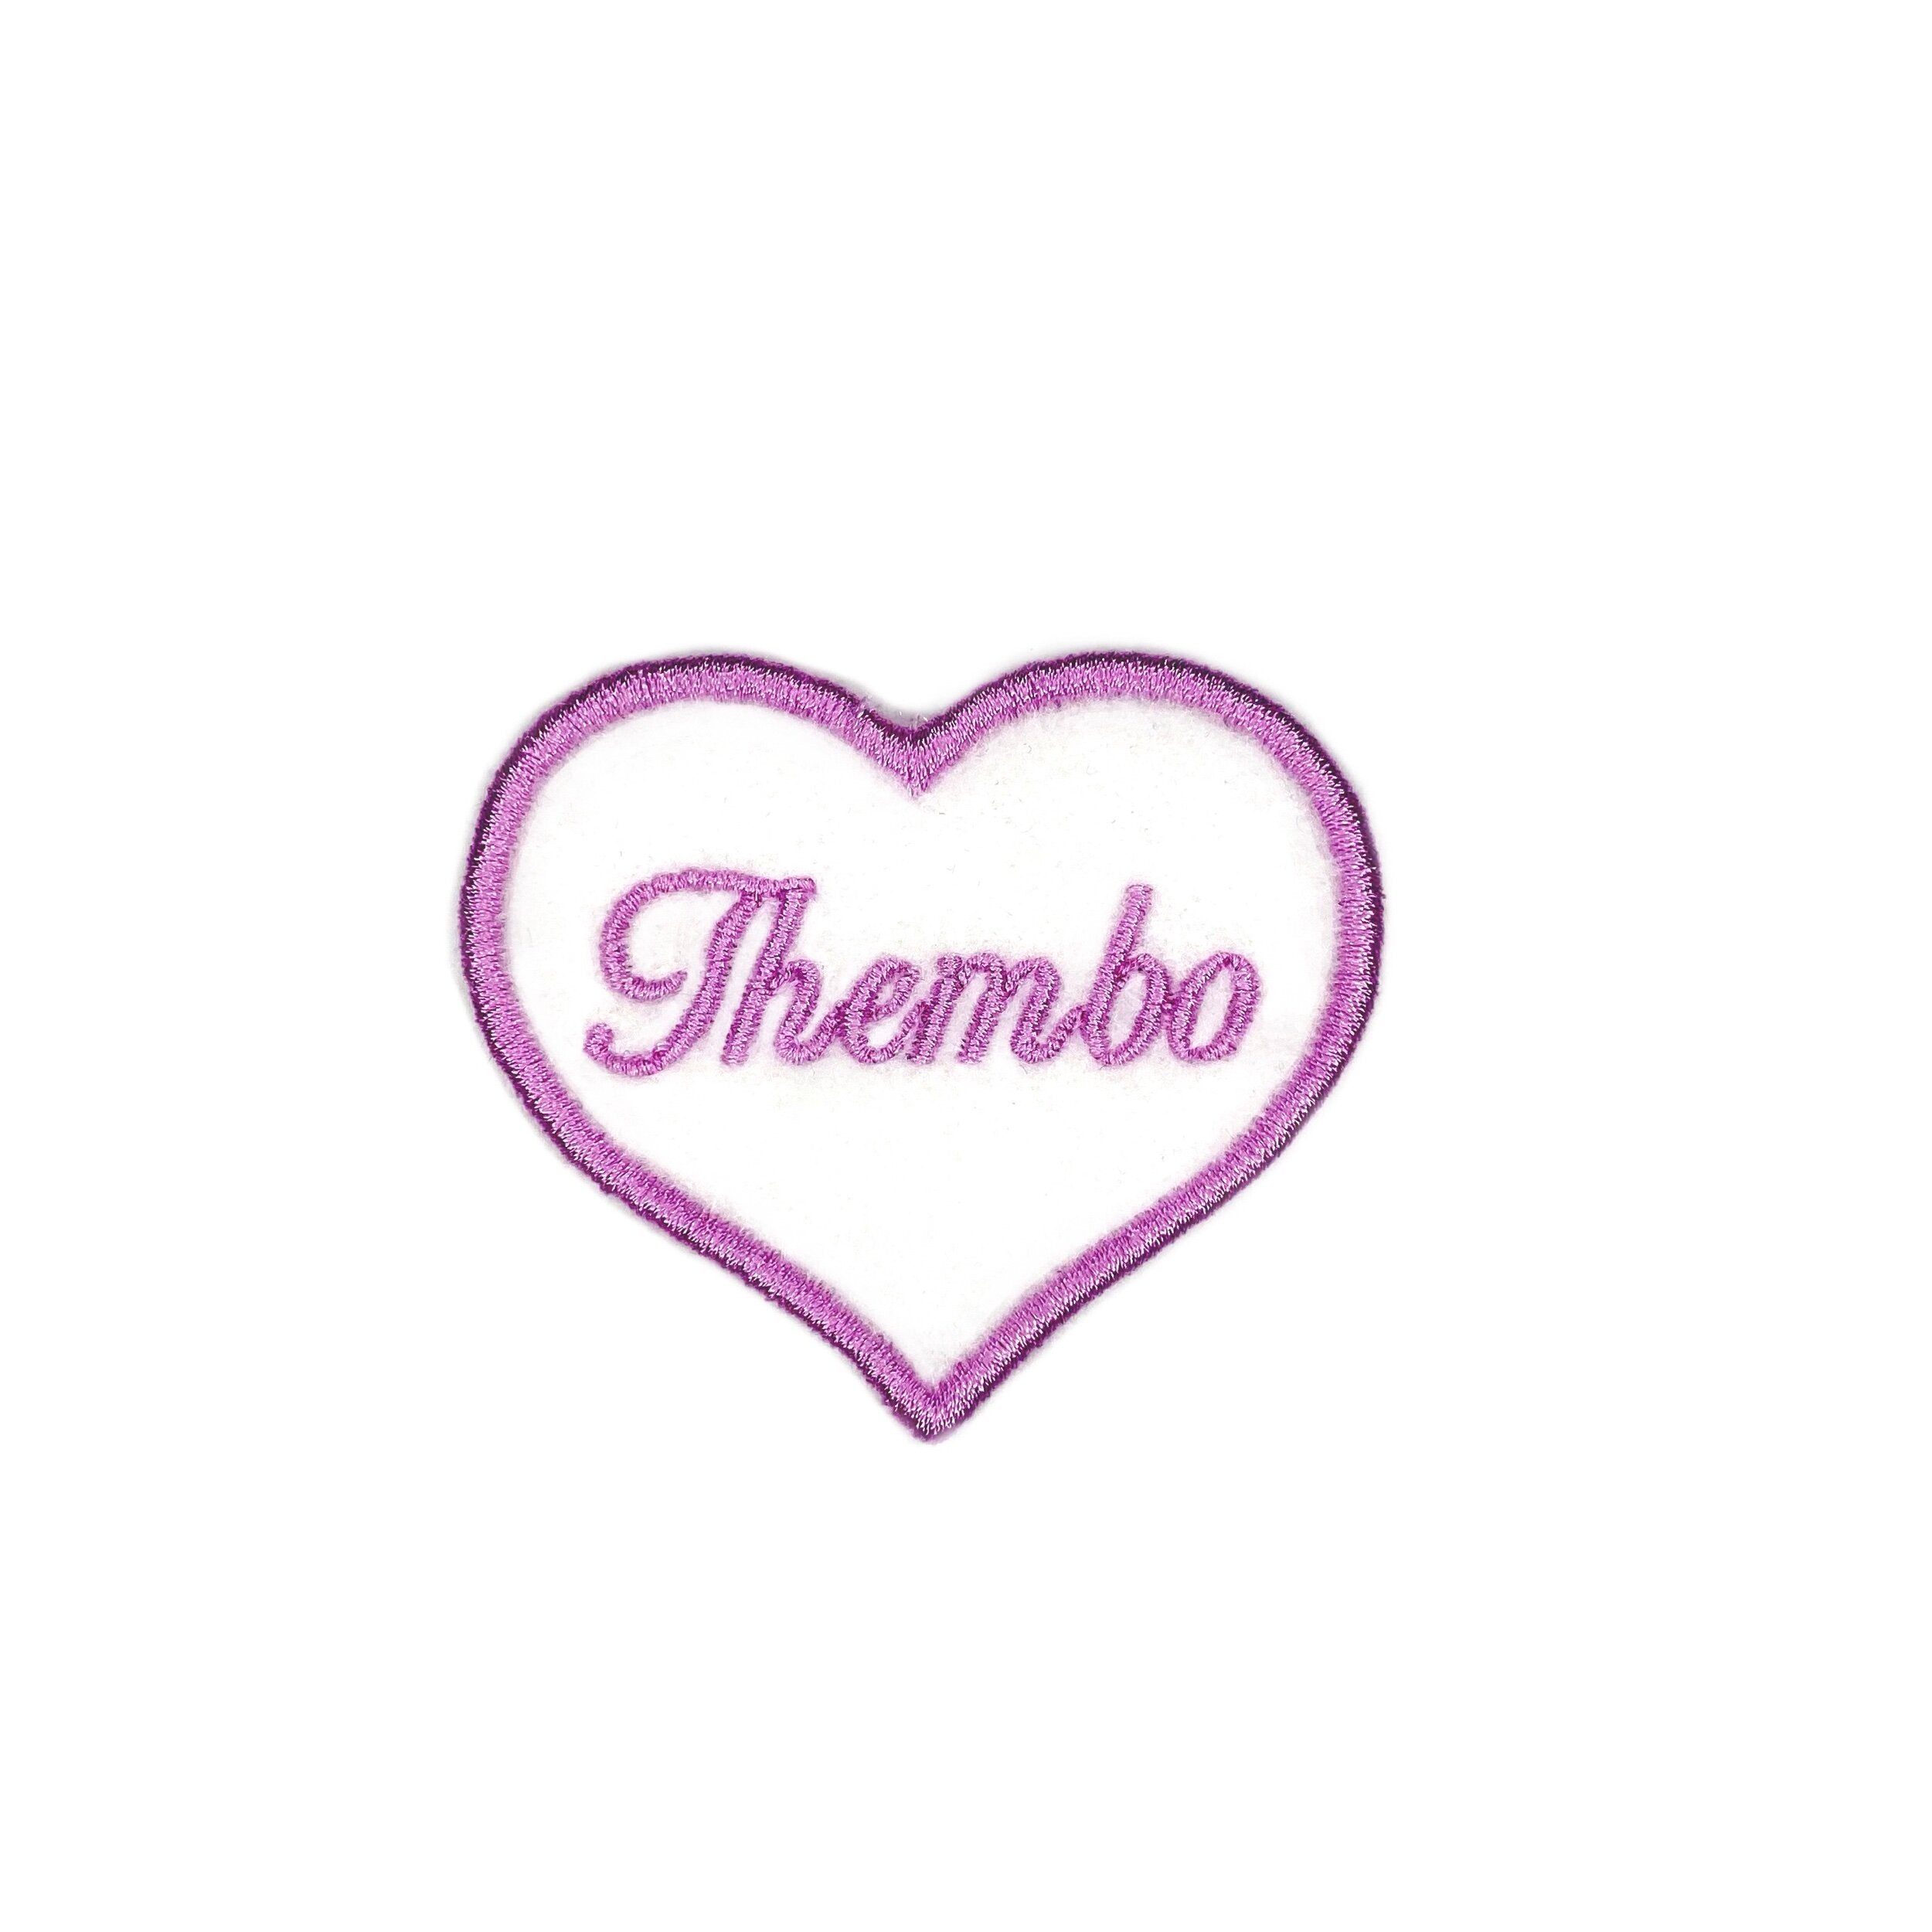 Thembo Embroidered Iron-on Patch - IncredibleGood Inc